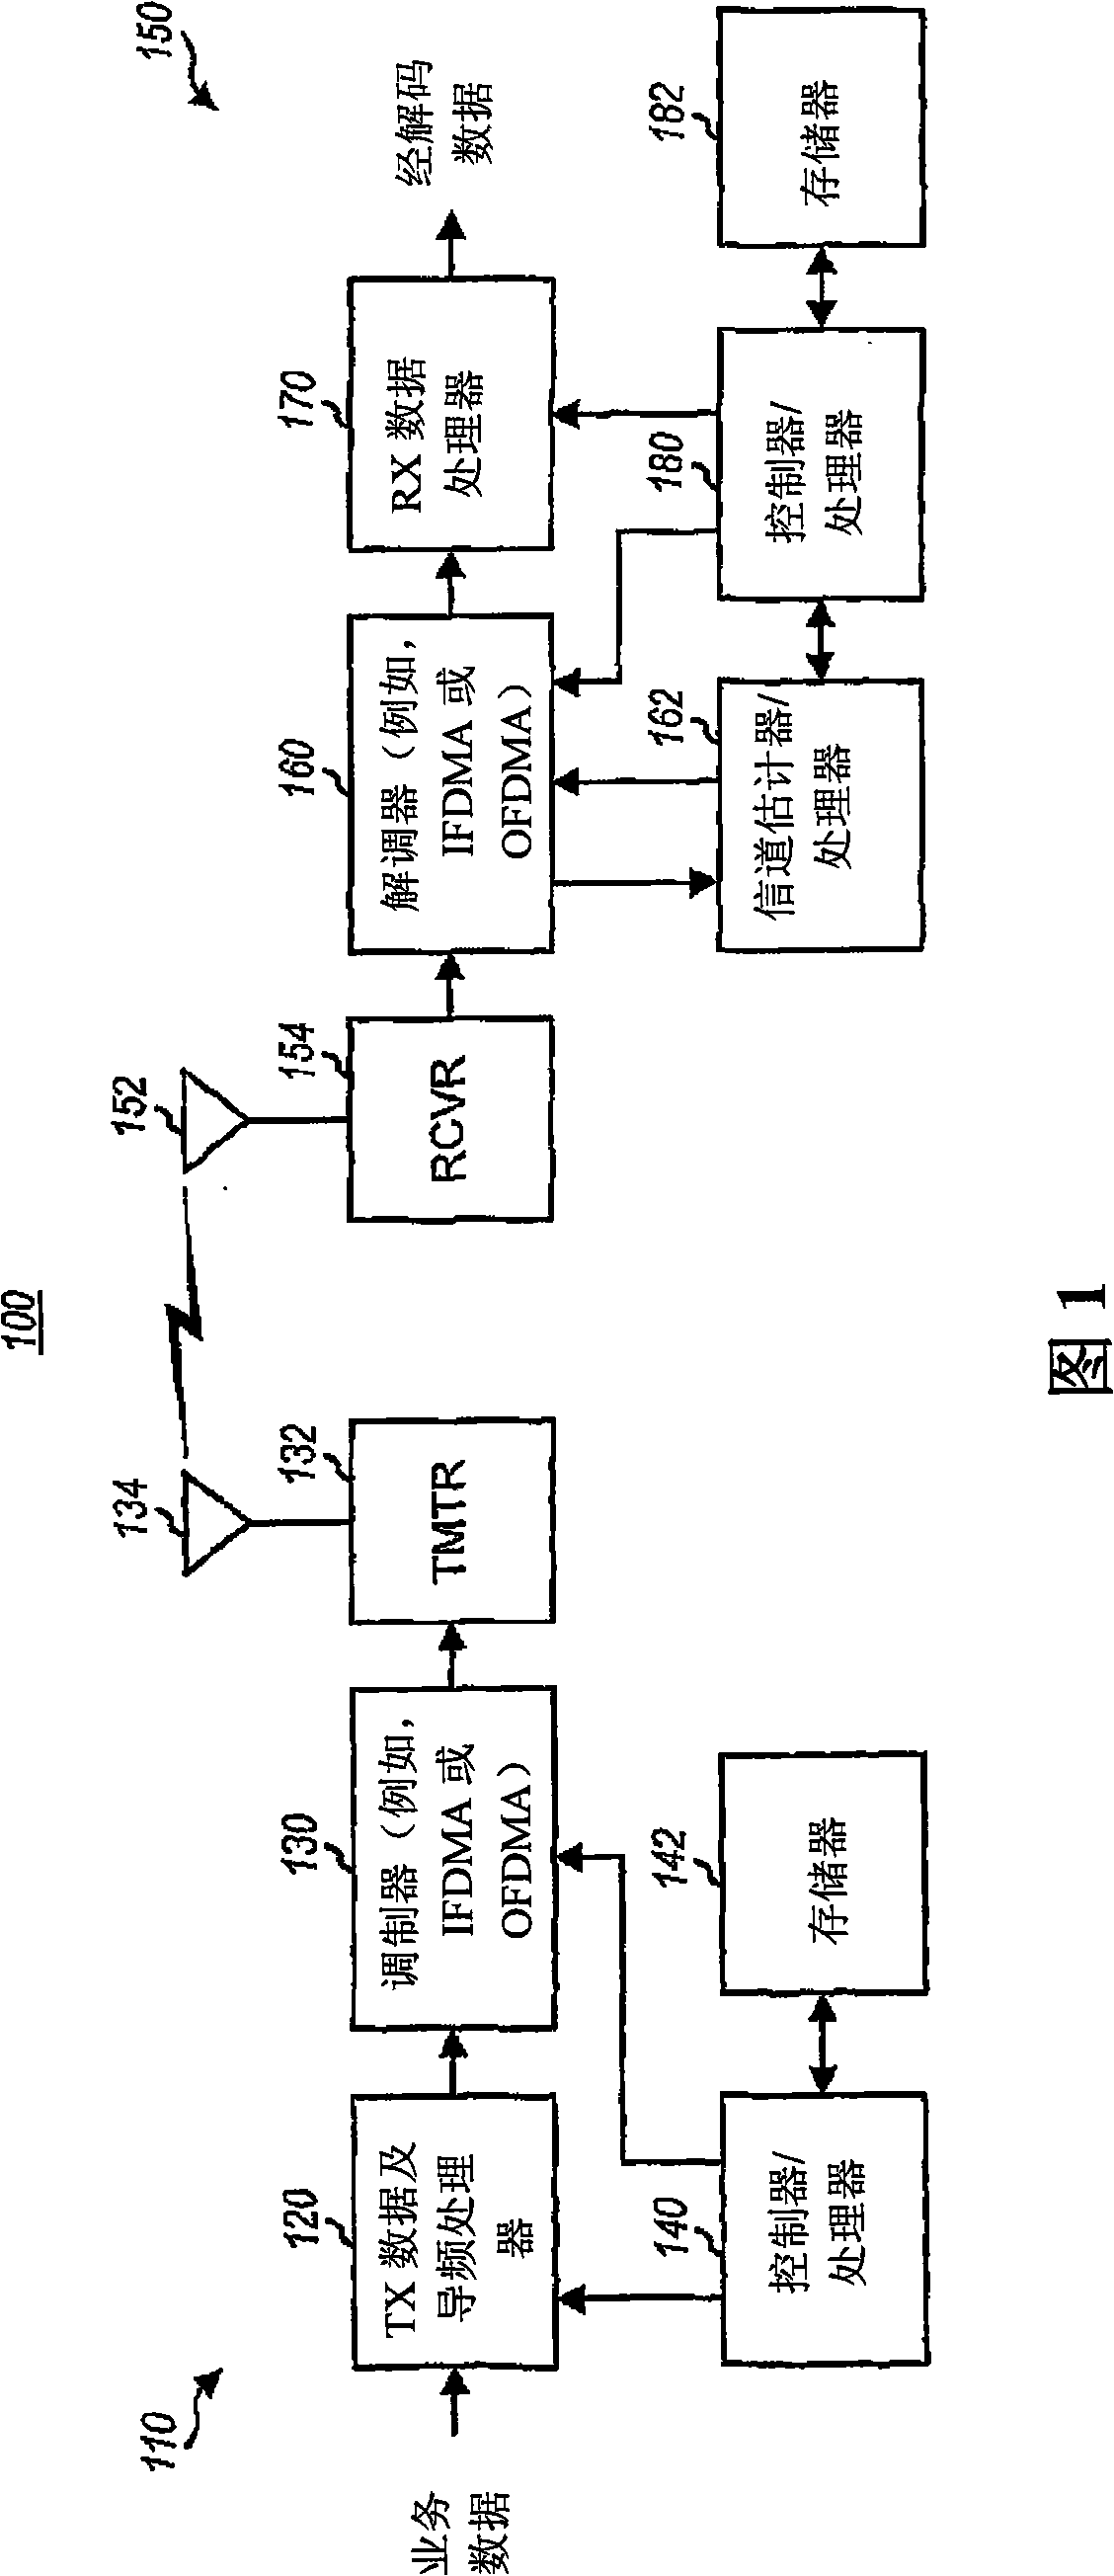 Configurable pilots in a wireless communication system